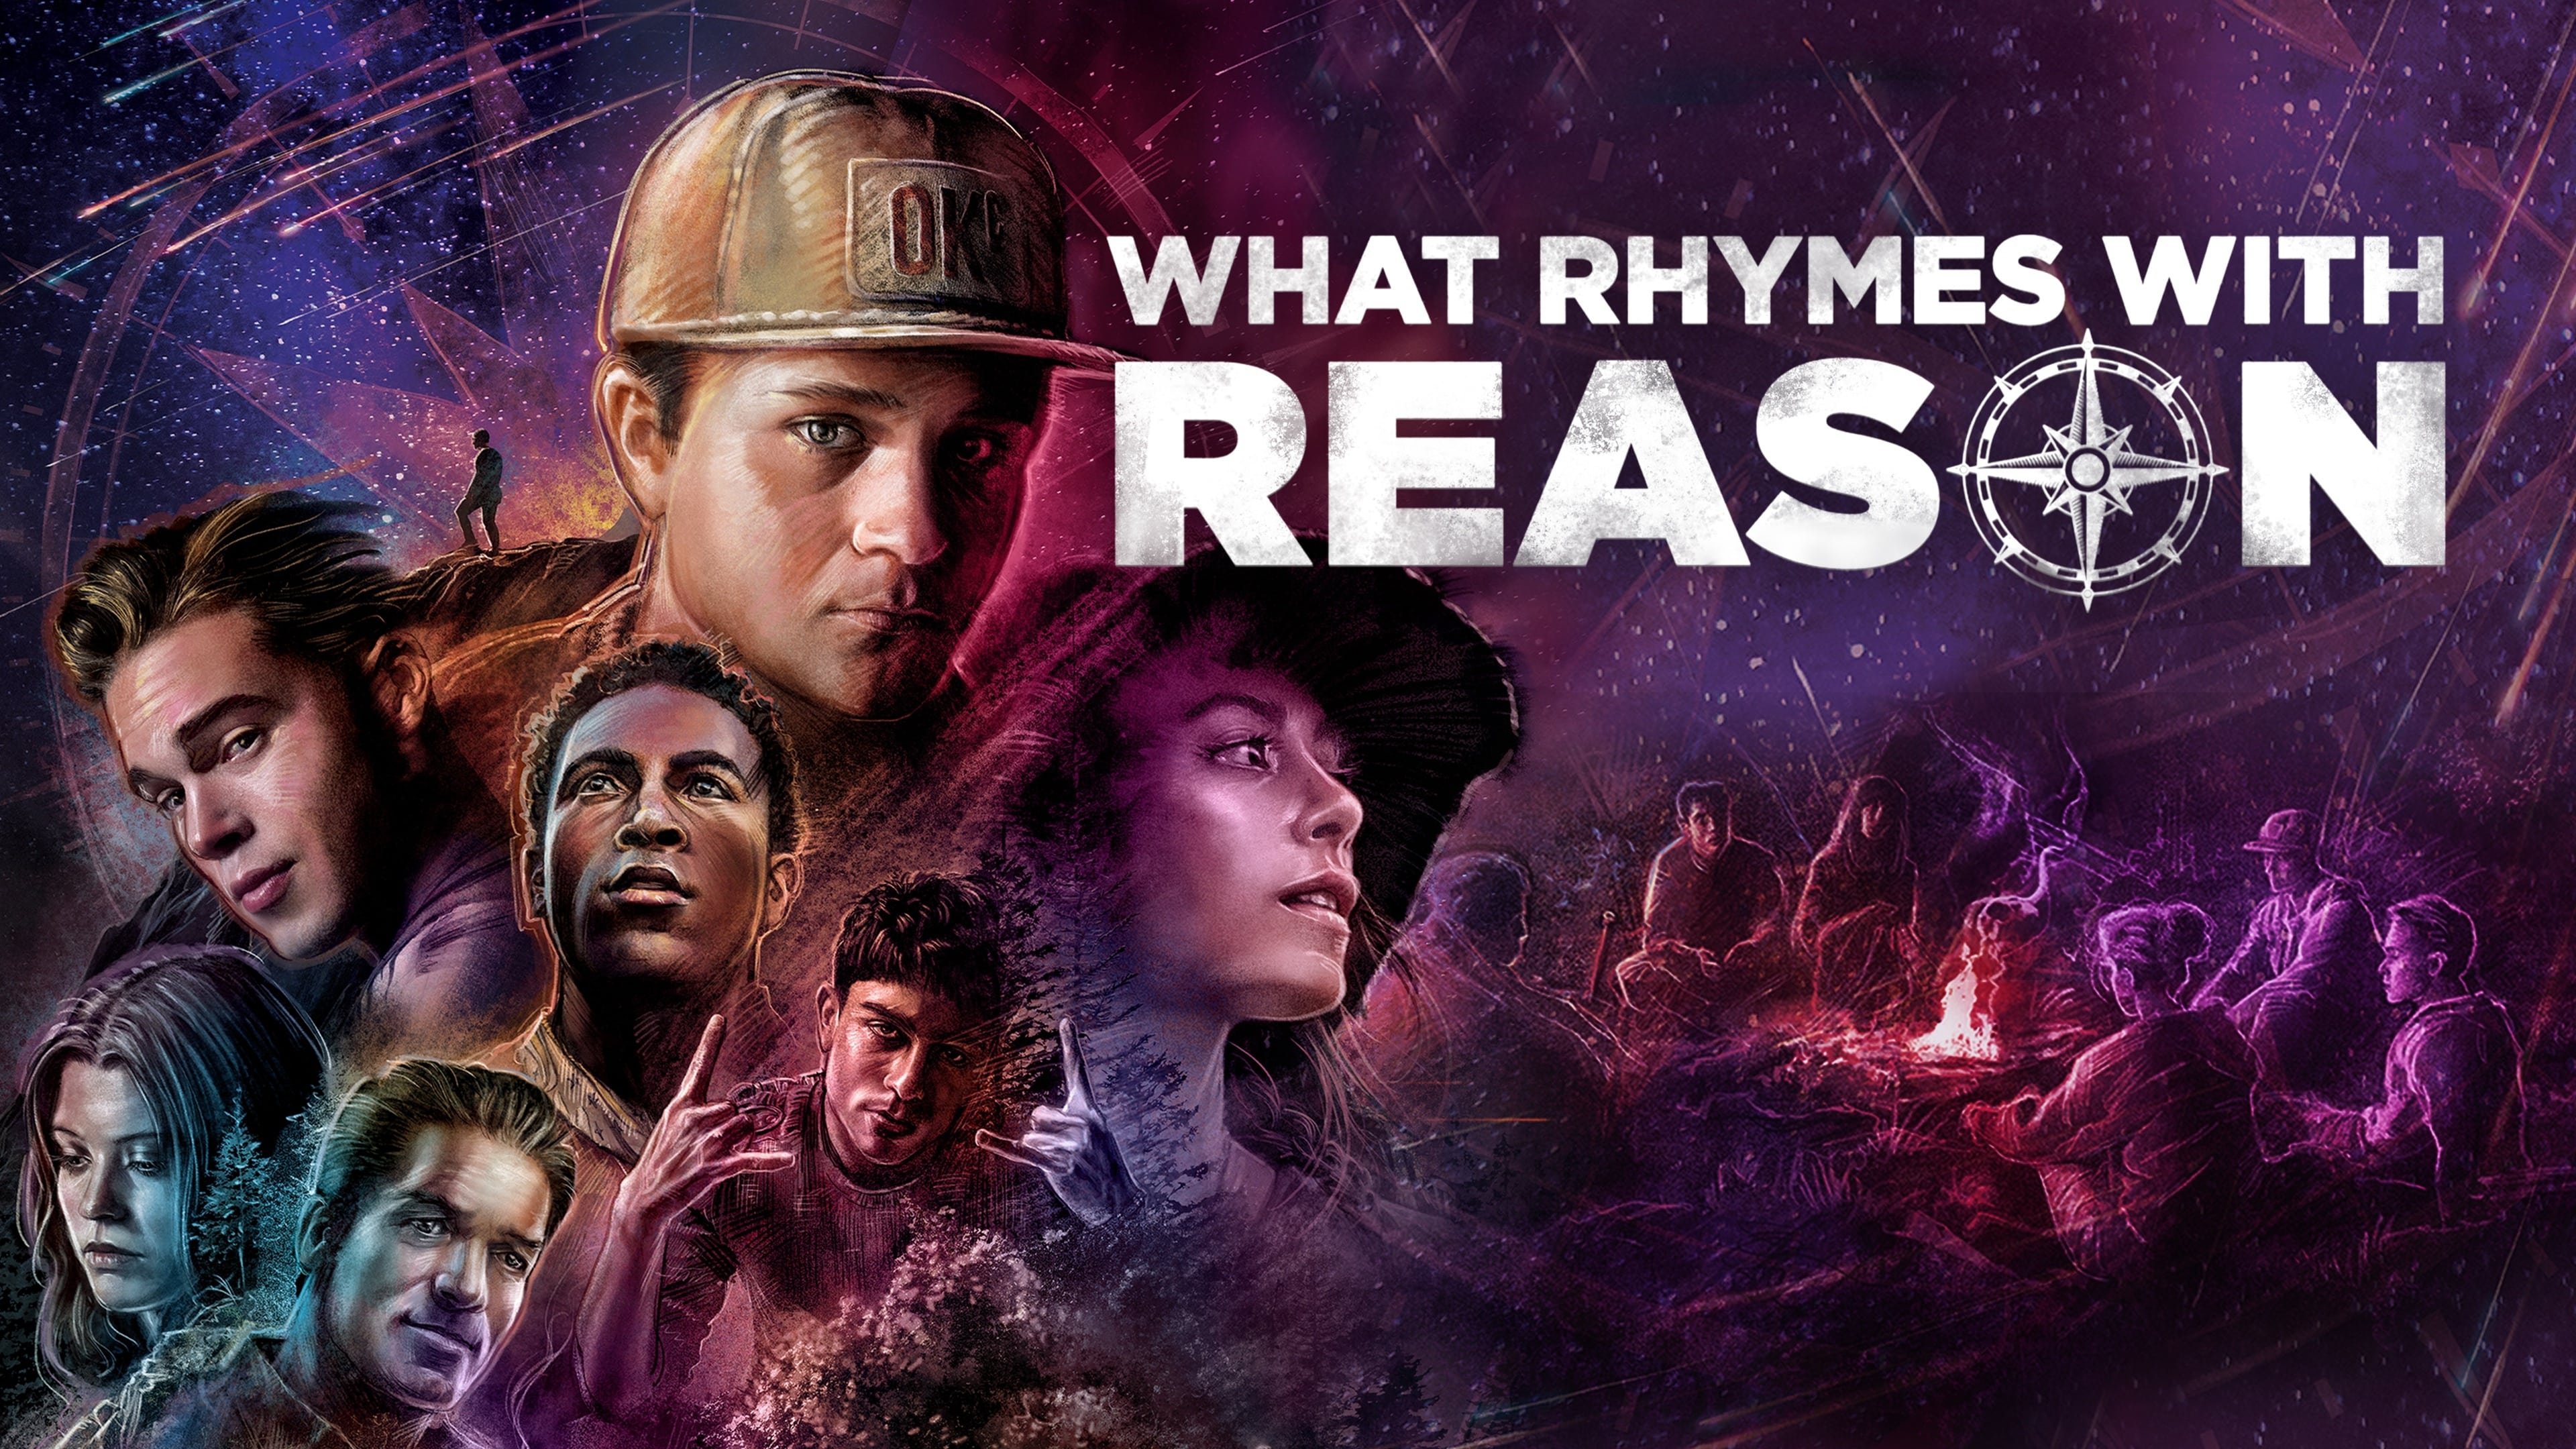 What Rhymes with Reason - film